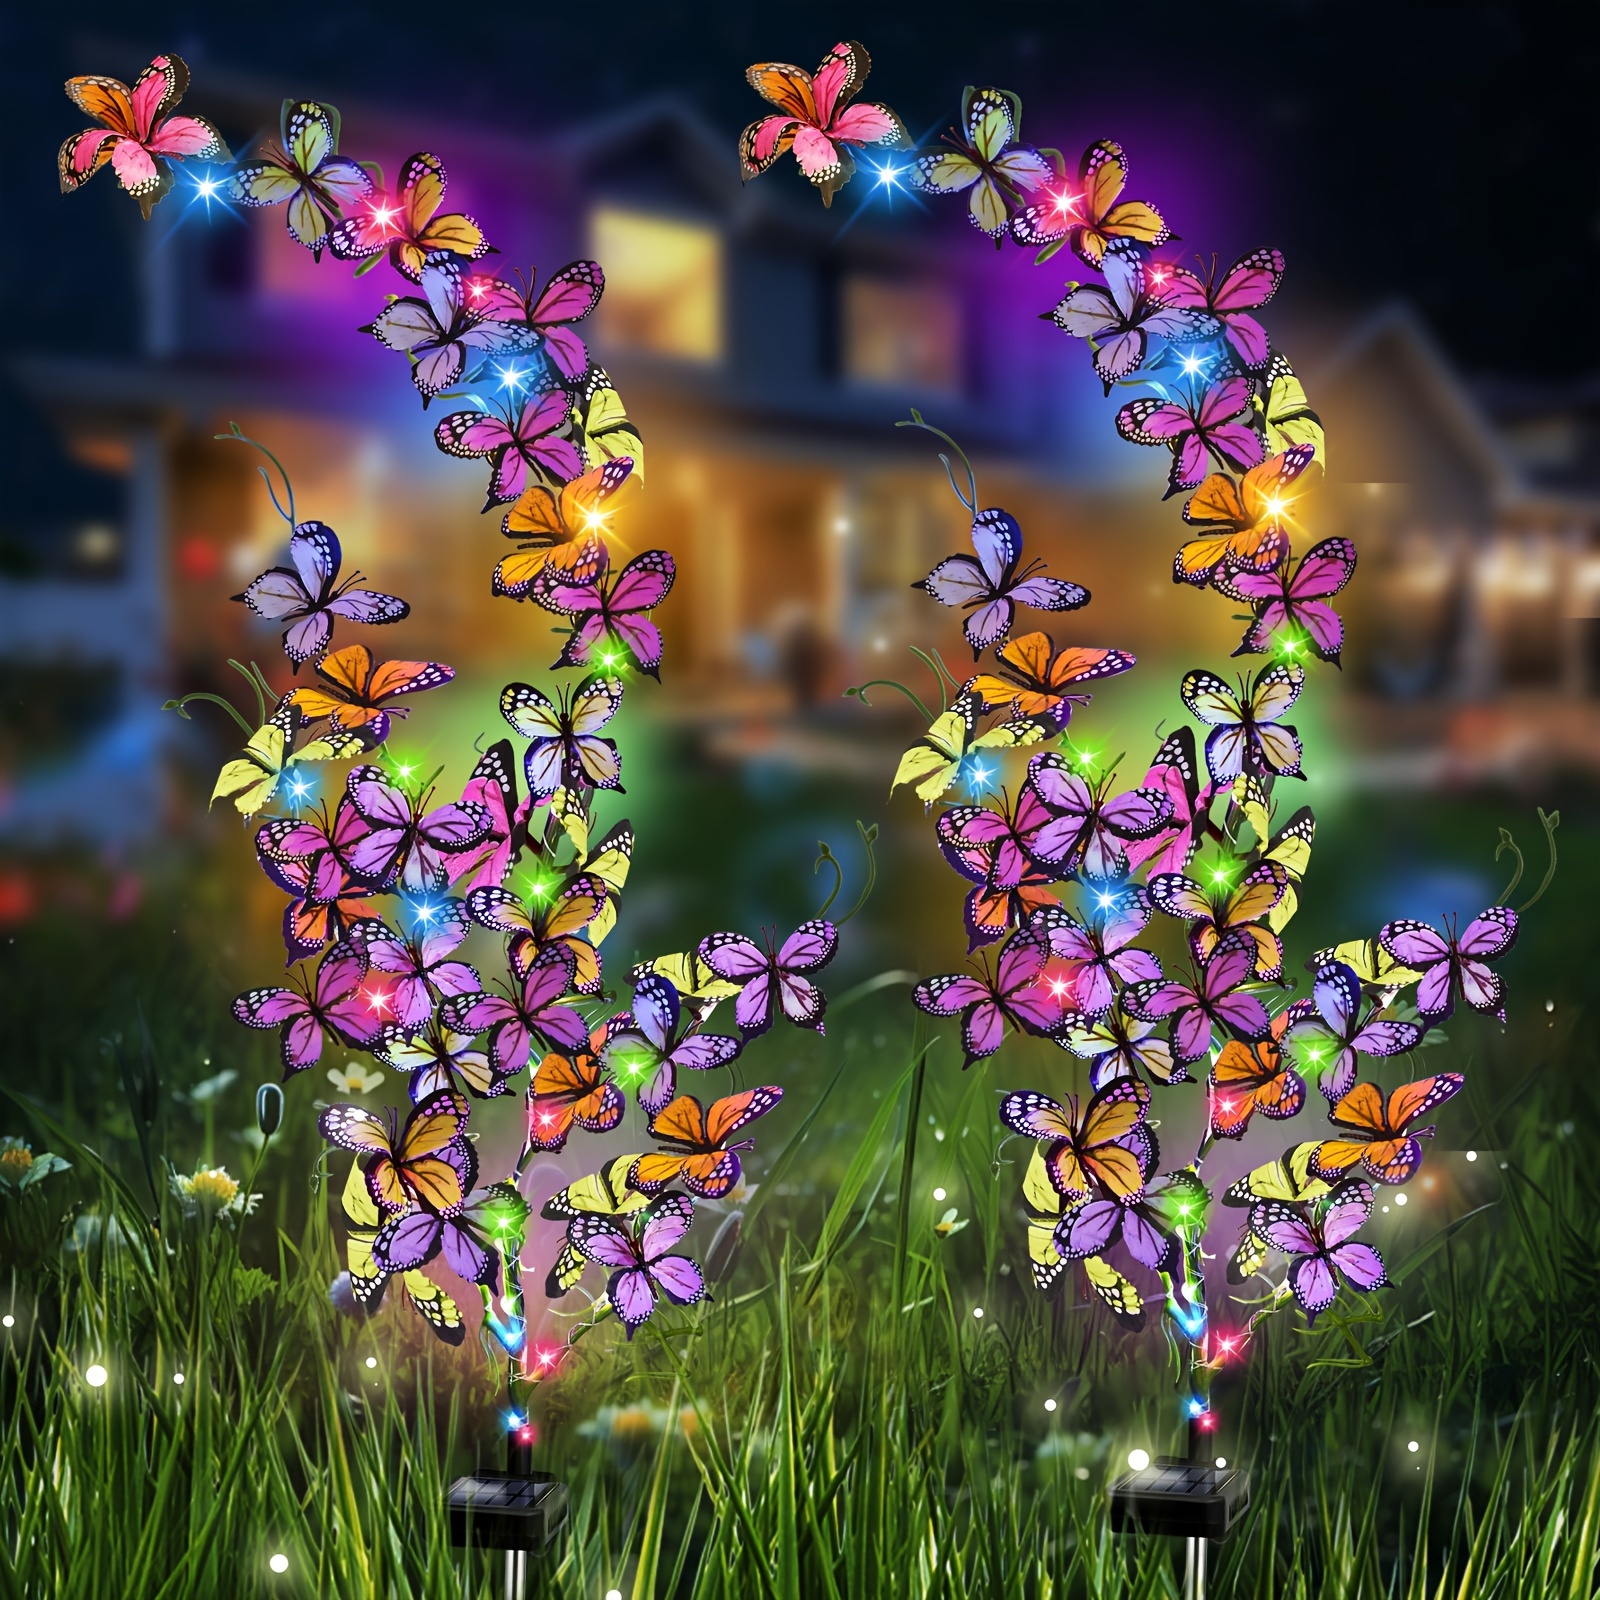 

2 Pack, 4 Pack Outdoor, Solar Lights Willow Vine Lights With 90 Led 33 Butterfly Colorful Lighting For Garden Yard Lawn Outdoor Decor Gift